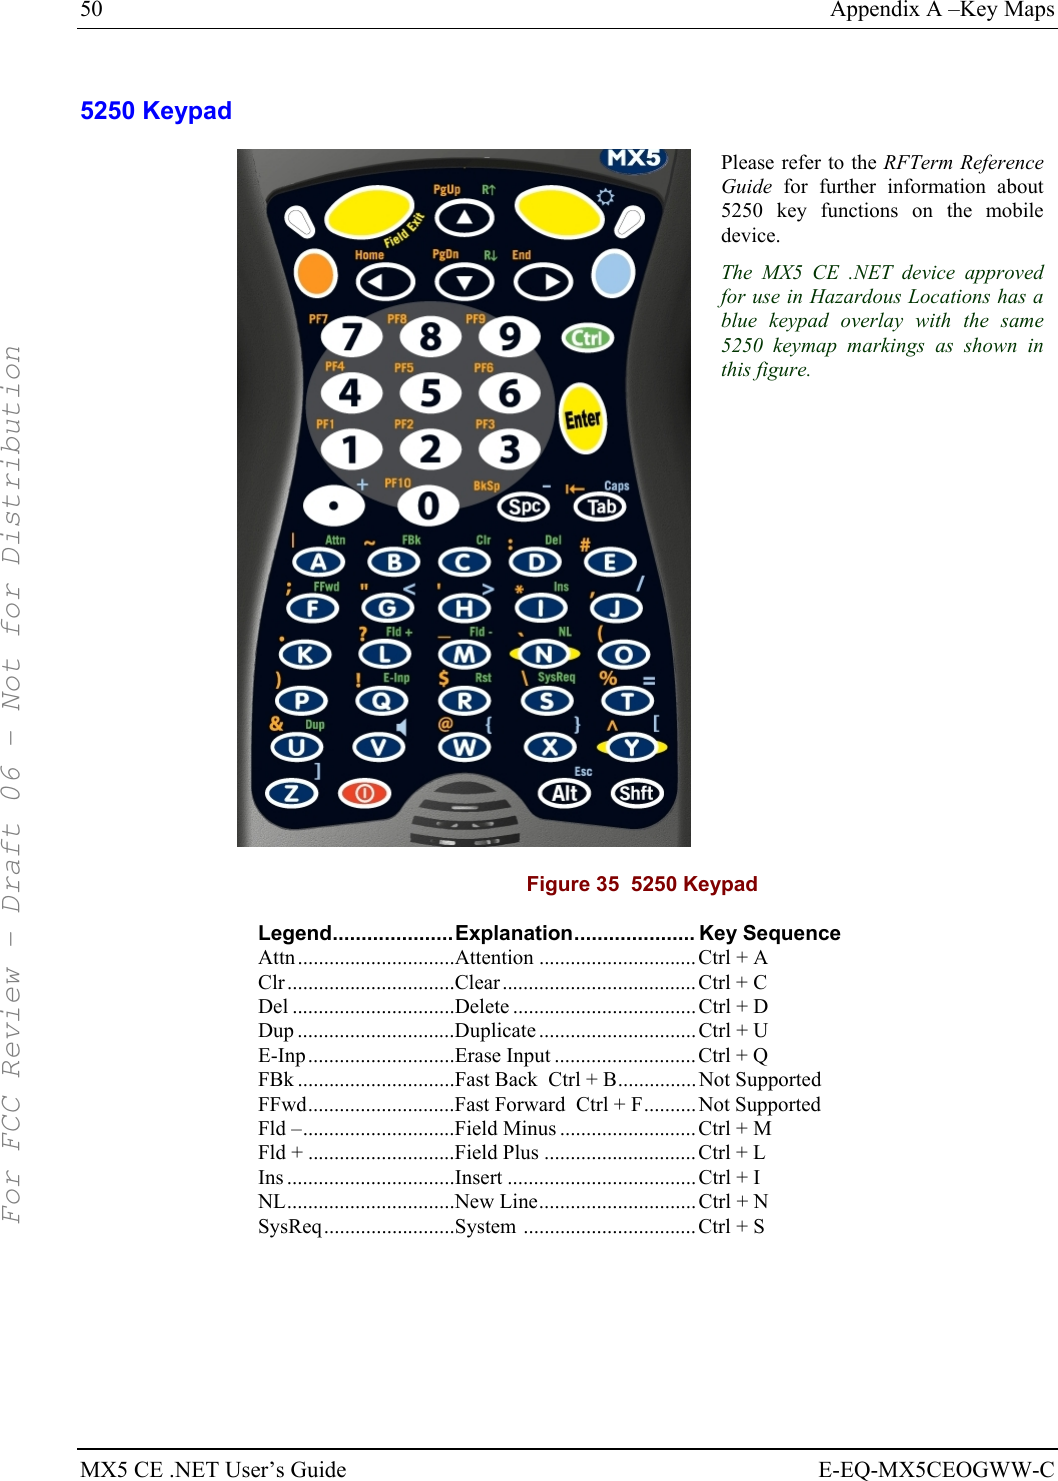 50  Appendix A –Key Maps MX5 CE .NET User’s Guide  E-EQ-MX5CEOGWW-C 5250 Keypad  Please refer to the RFTerm Reference Guide for further information about 5250 key functions on the mobile device. The MX5 CE .NET device approved for use in Hazardous Locations has a blue keypad overlay with the same 5250 keymap markings as shown in this figure.   Figure 35  5250 Keypad Legend.....................Explanation..................... Key Sequence Attn..............................Attention .............................. Ctrl + A Clr................................Clear..................................... Ctrl + C Del ...............................Delete ................................... Ctrl + D Dup ..............................Duplicate ..............................Ctrl + U E-Inp............................Erase Input ........................... Ctrl + Q FBk ..............................Fast Back  Ctrl + B............... Not Supported FFwd............................Fast Forward  Ctrl + F.......... Not Supported Fld –.............................Field Minus ..........................Ctrl + M Fld + ............................Field Plus .............................Ctrl + L Ins ................................Insert ....................................Ctrl + I NL................................New Line..............................Ctrl + N SysReq.........................System .................................Ctrl + S     For FCC Review - Draft 06 - Not for Distribution